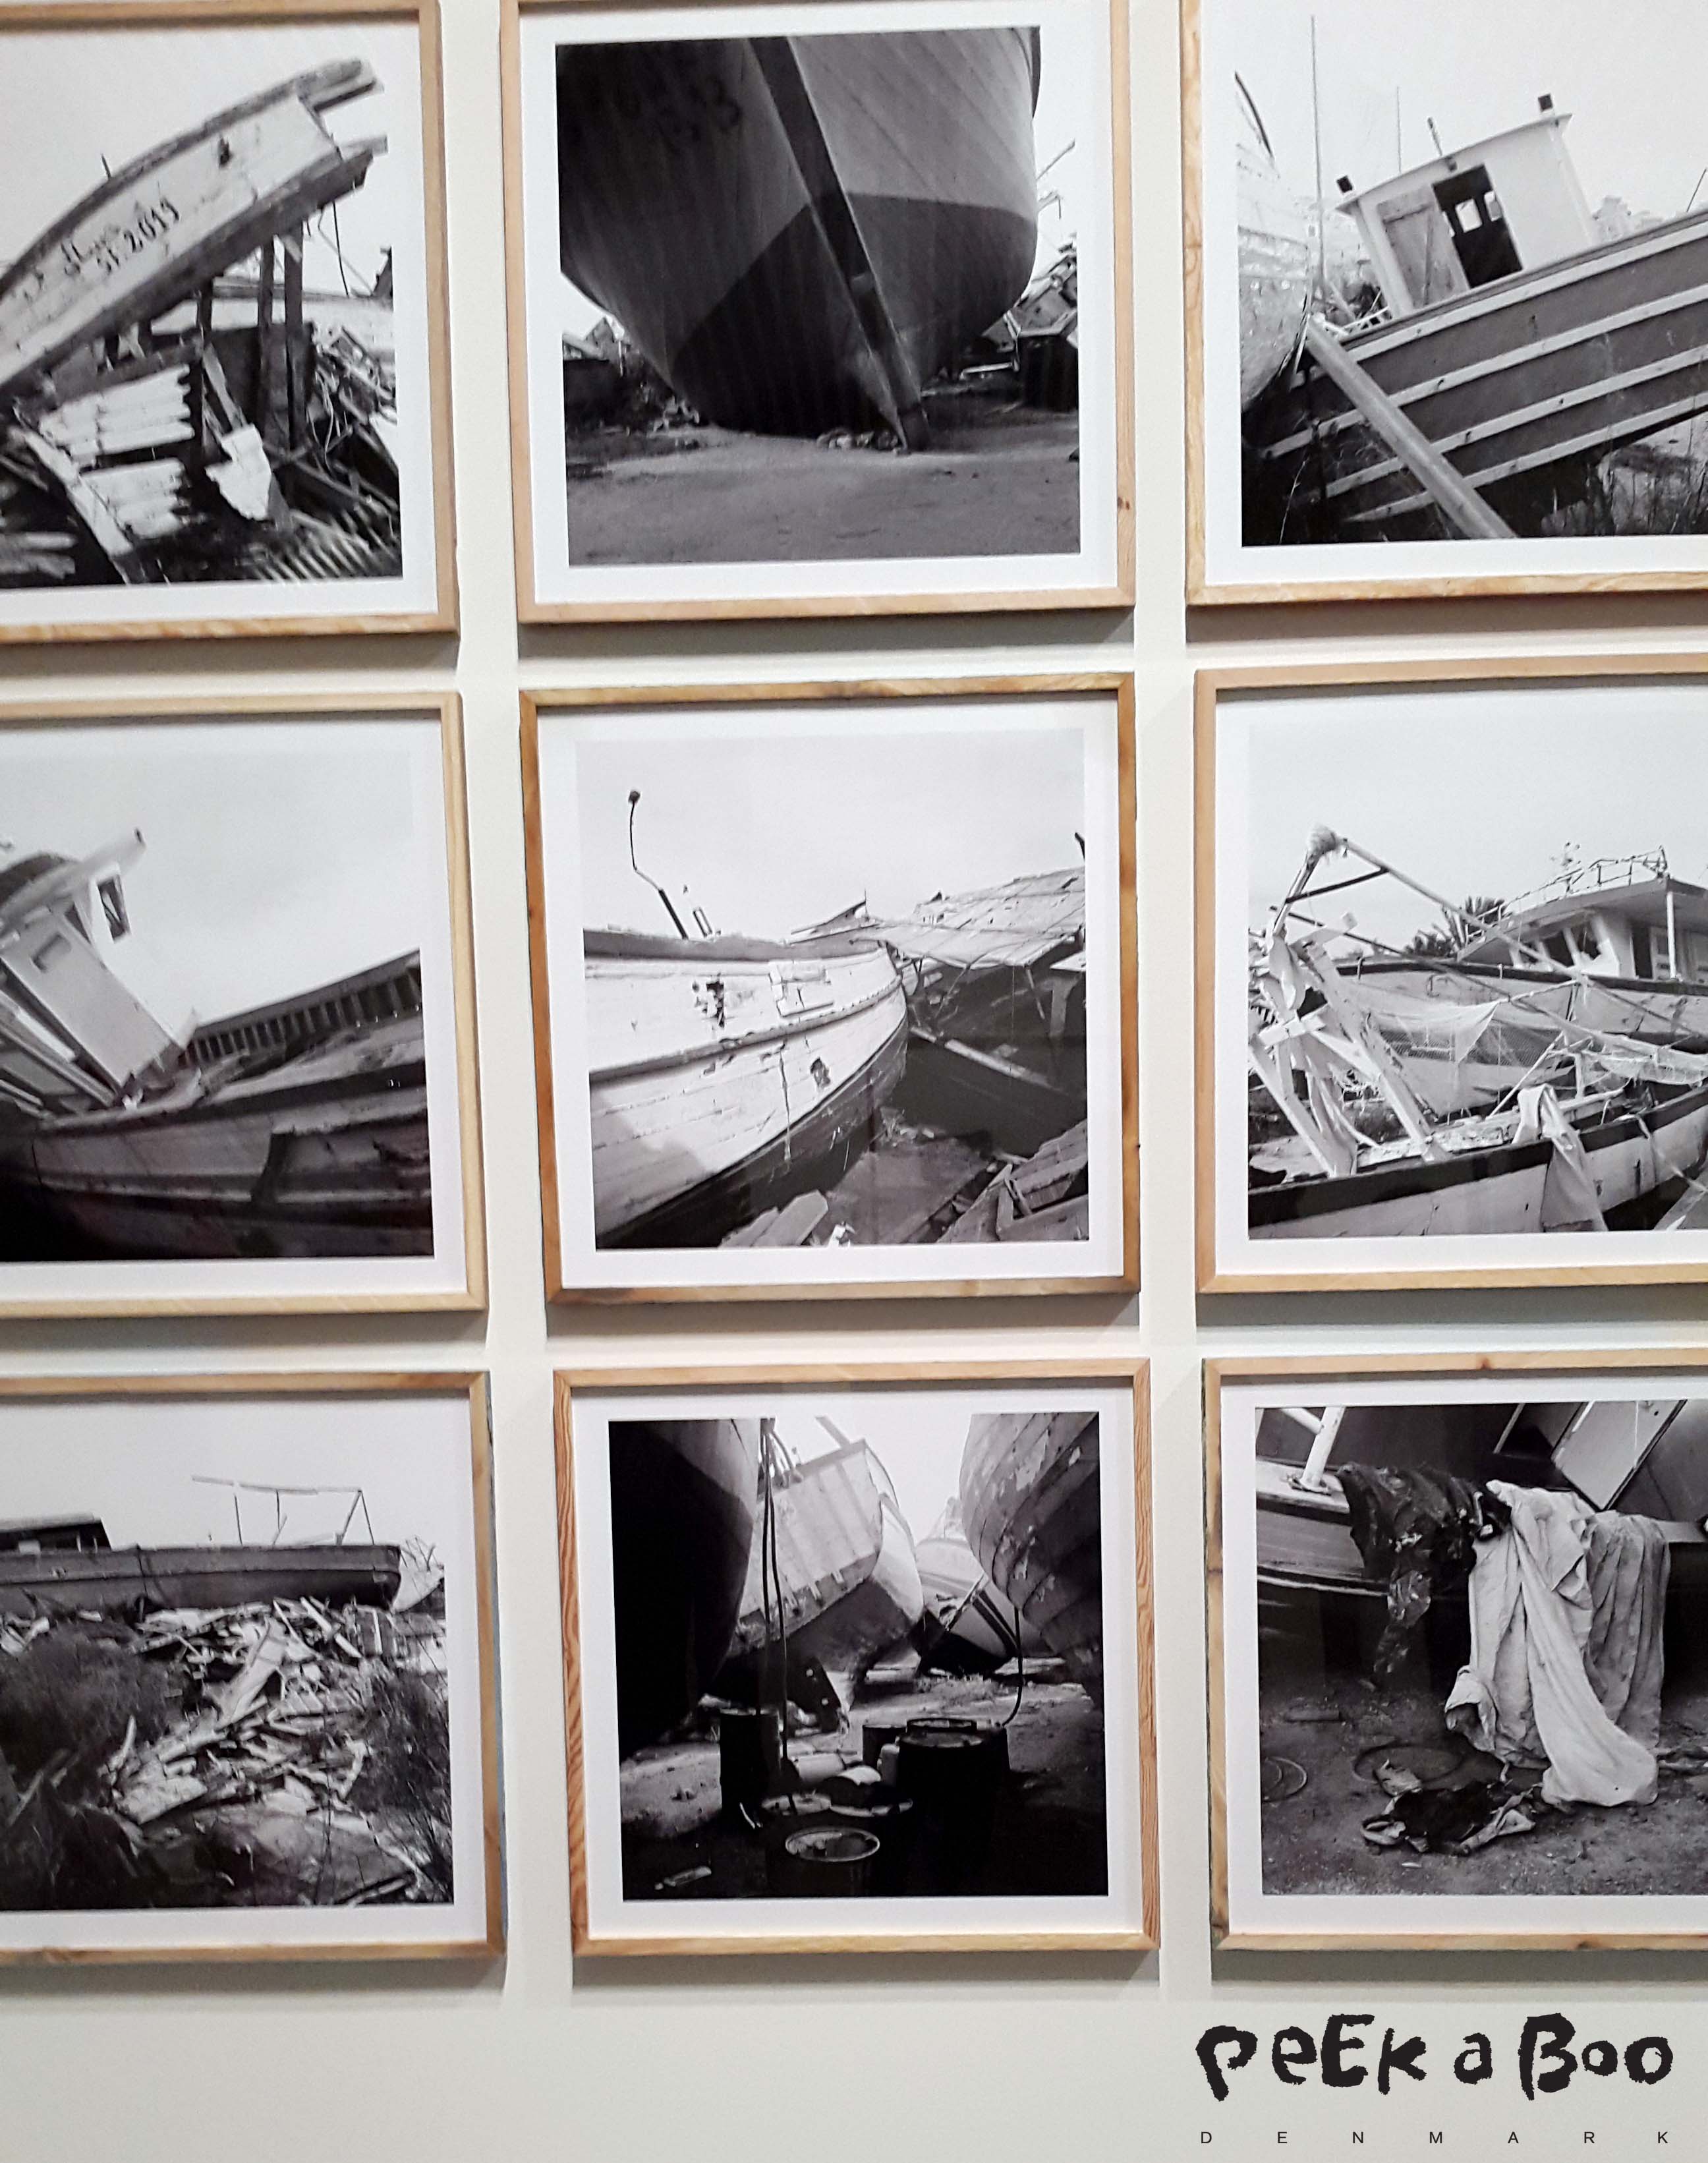 E.B. Itso exhibits at the art museum Aros in Århus, this is Photos from the Italian Island Lampaduso, where the boats have been transporting refugees to Italy.